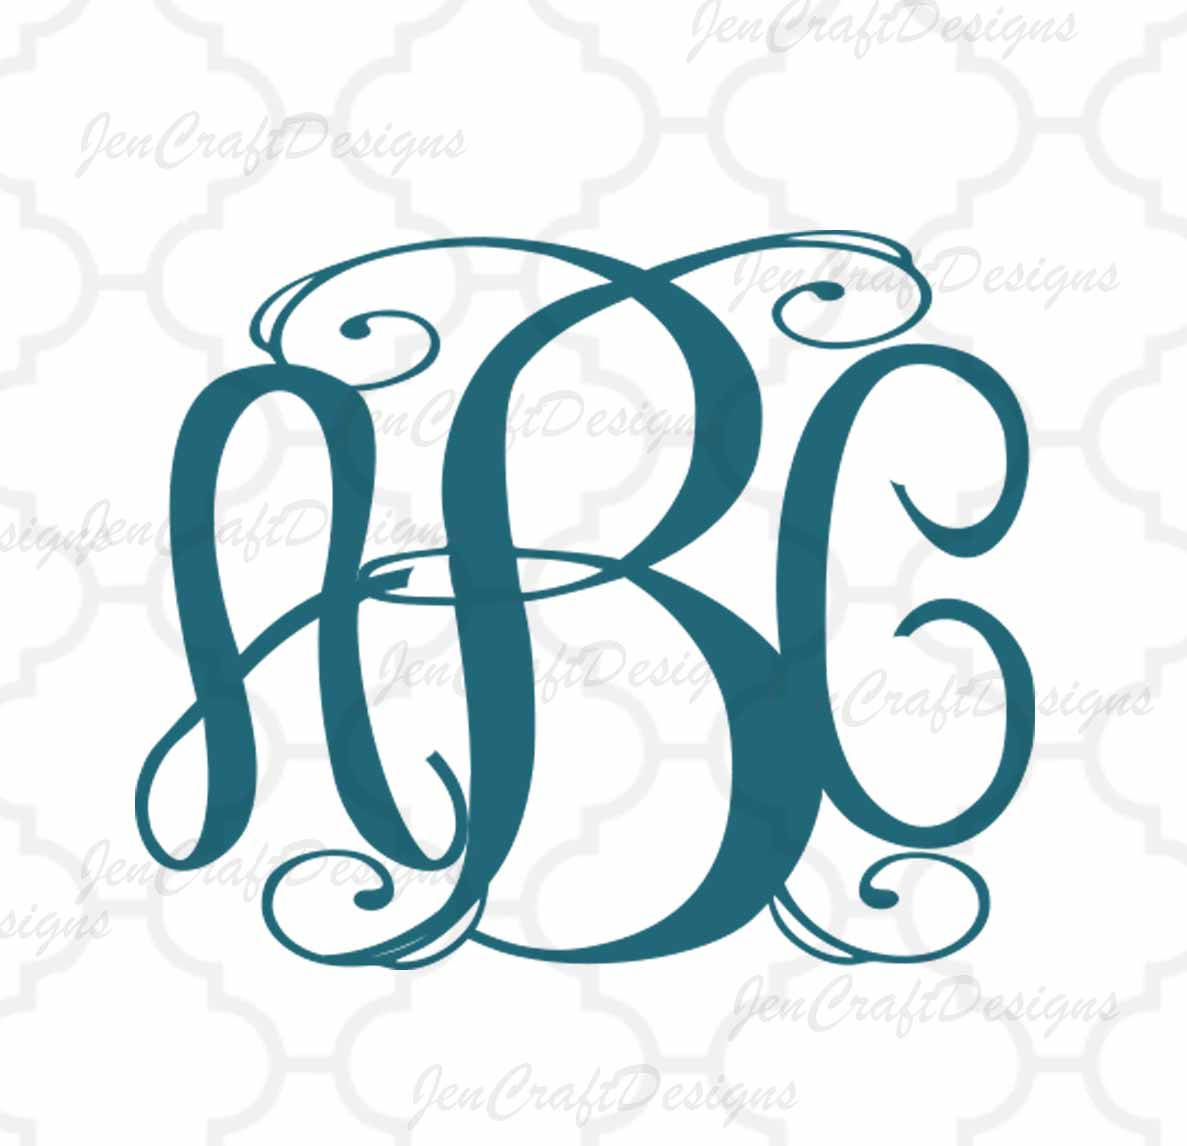 Exclusive Classy Locking Monogram AlphaBet SVG, EPS, DXF and PNG - JenCraft Designs